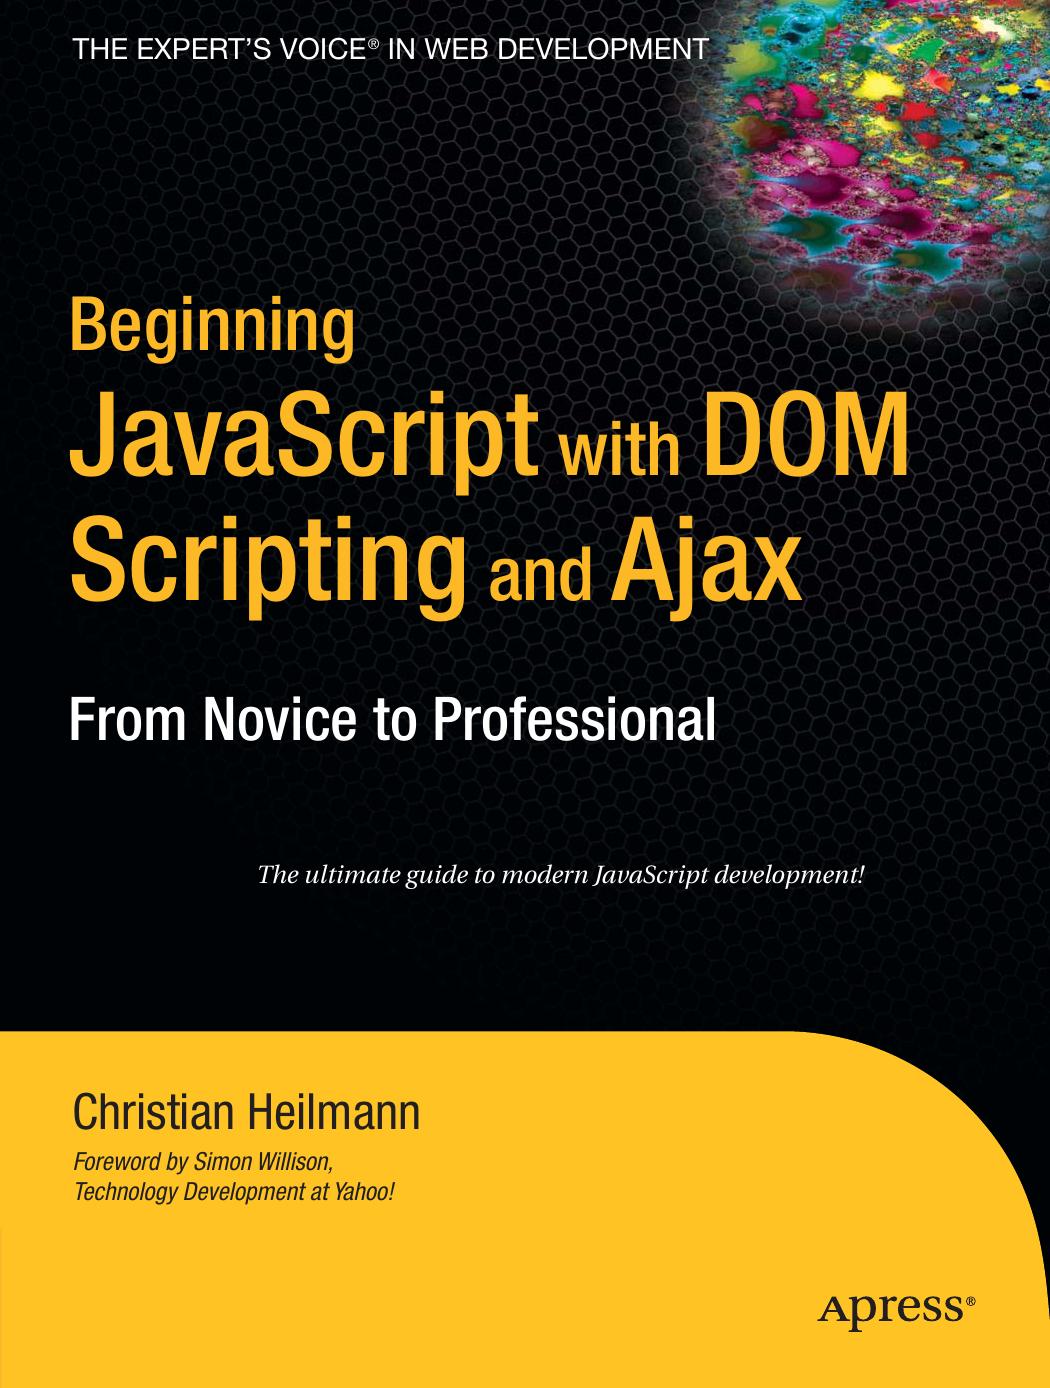 Beginning Javascript With DOM Scripting and Ajax From NOvice to Professional